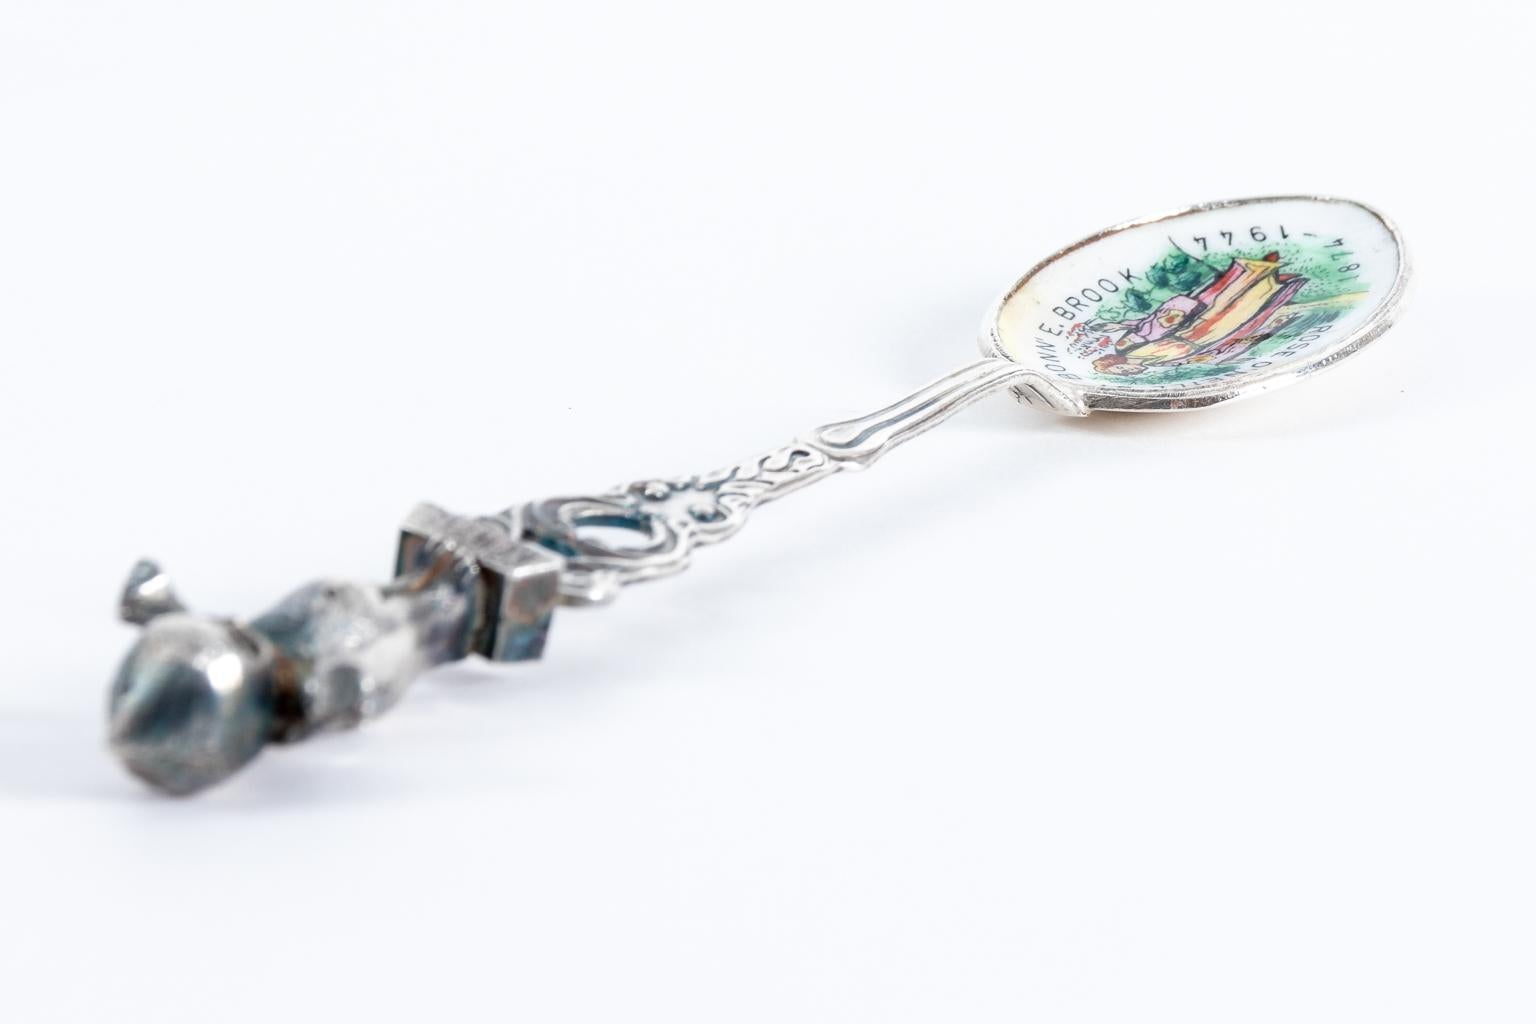 Rose O'Neill sterling and enamel spoon depicts a three dimensional kewpie on top, circa 1930s. This vintage spoon has a kewpie finial and an enameled bowl. The bowl reads Rose O'Neill 1874-1944 Bonn'E.Brook. It is marked Sterling-Albert H. Cechsle